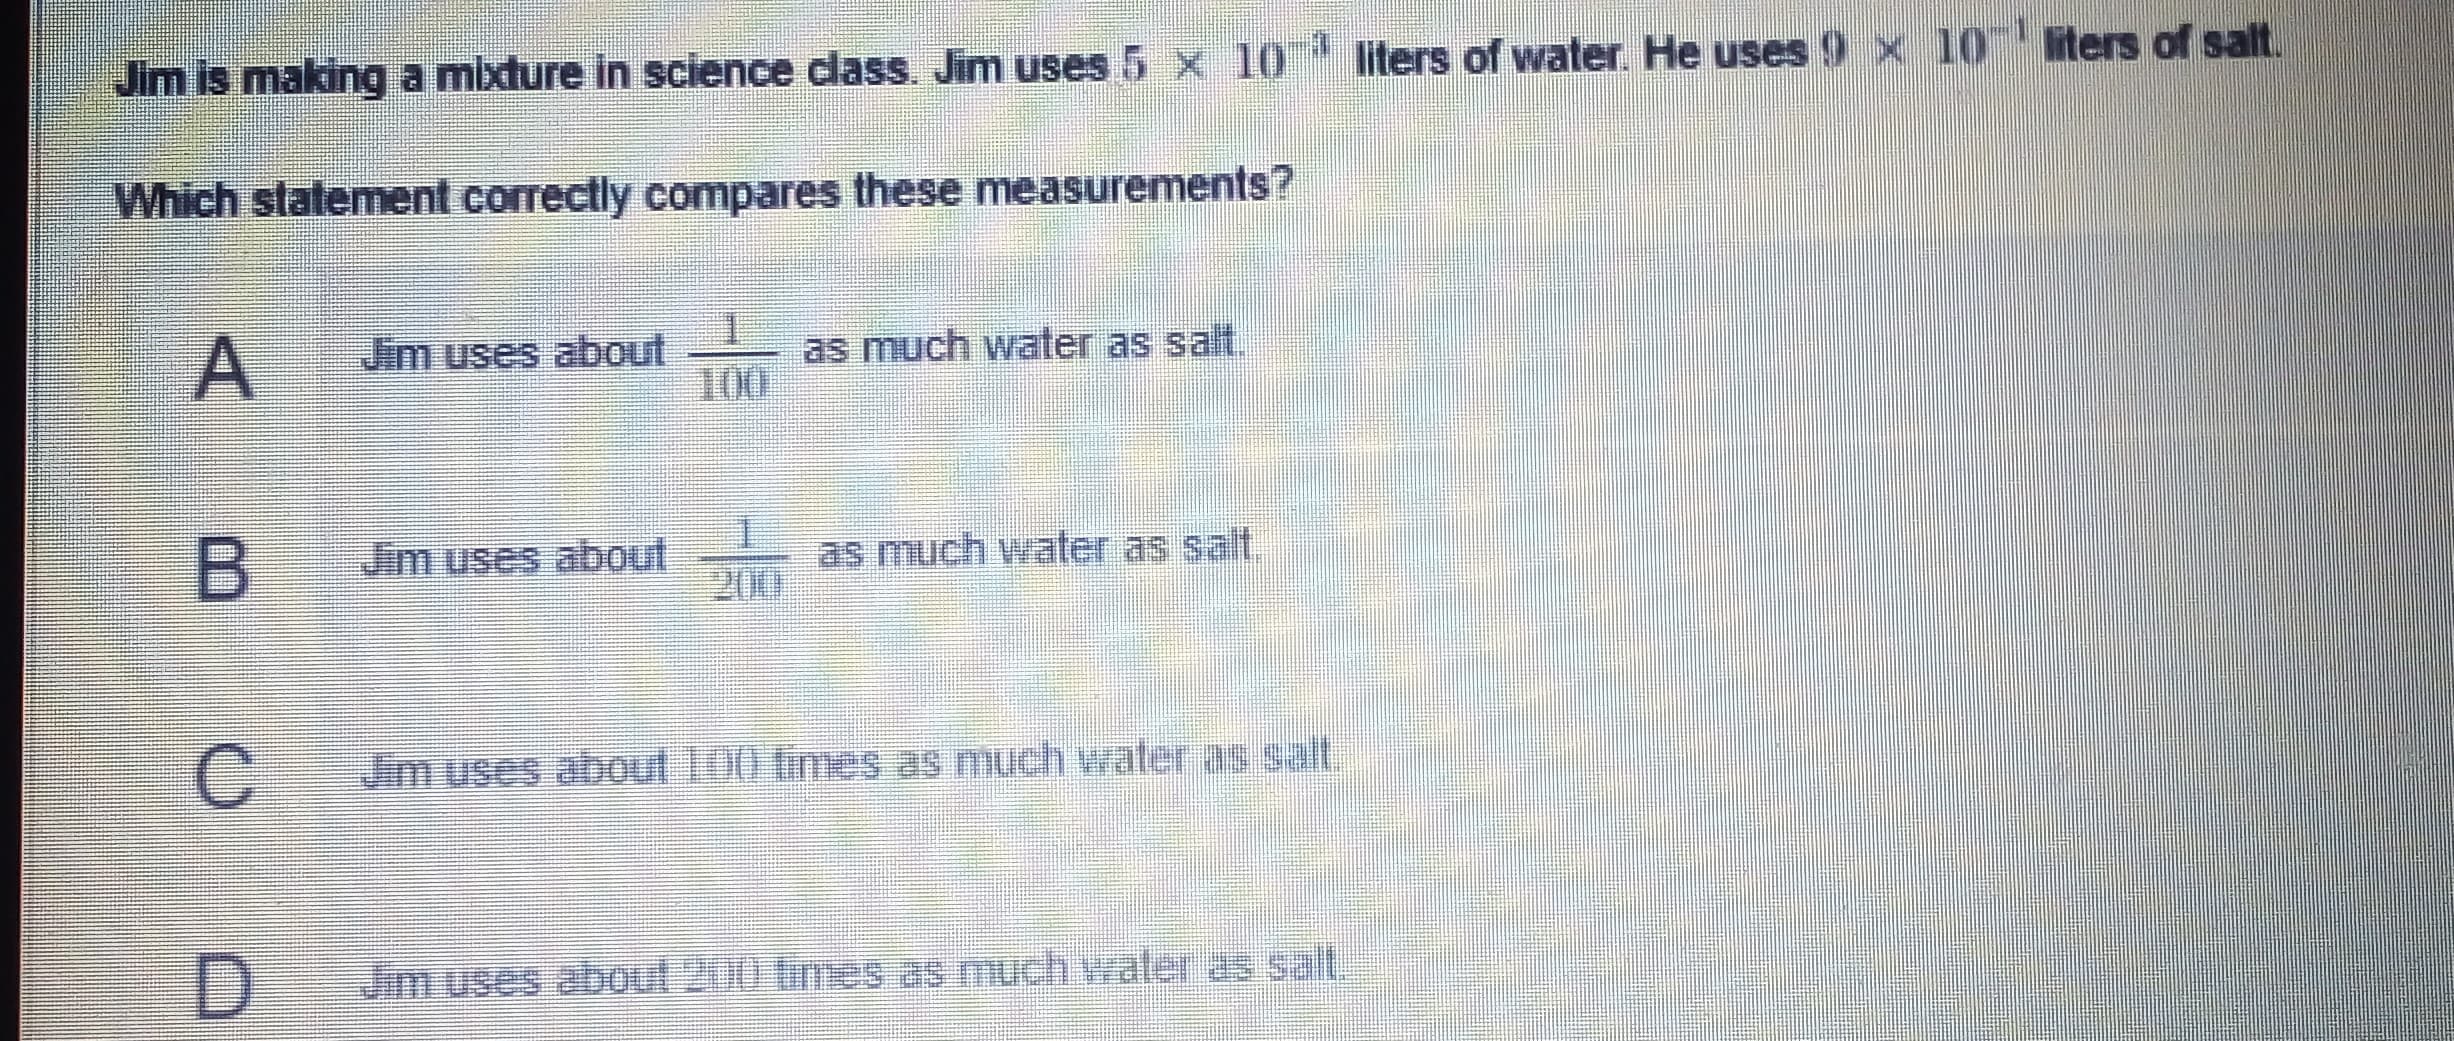 iters of salt.
liters of water. He uses 9 x 10
10
x
Jim is making a mixture in science dlass. Jim uses 5
Which statement correctly compares these measurements?
Jim uses about
100
as much water as salt.
Jim uses about
as much water as salt,
Jim uses about 100 times as much water as salt.
Jim uses about 200 times as much water as salt.
